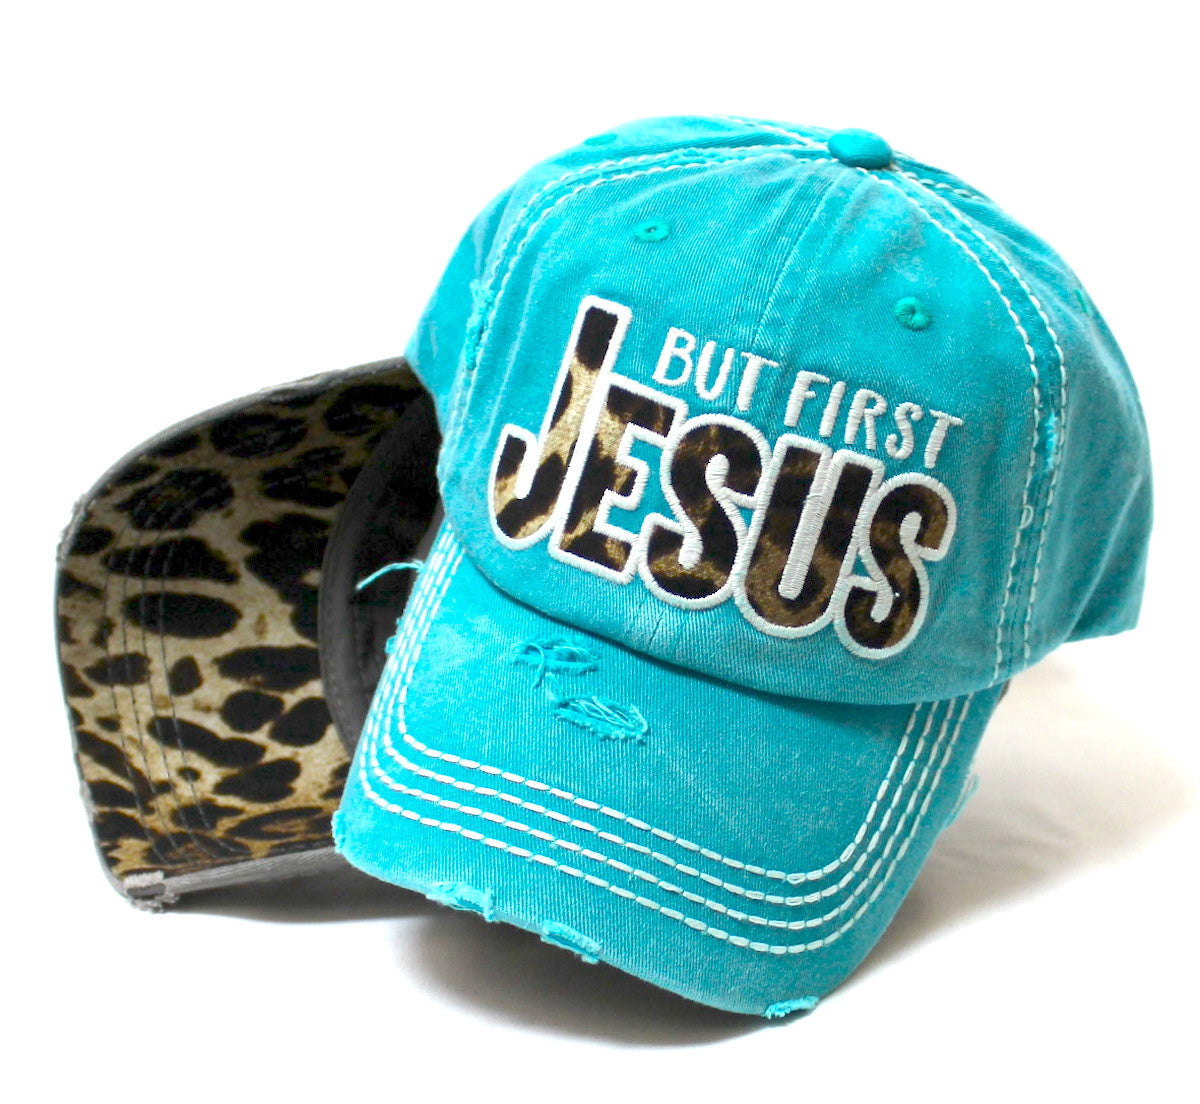 CAPS 'N VINTAGE Women's Distressed Leopard Ballcap But First Monogram Embroidery Hat, Turquoise Blue